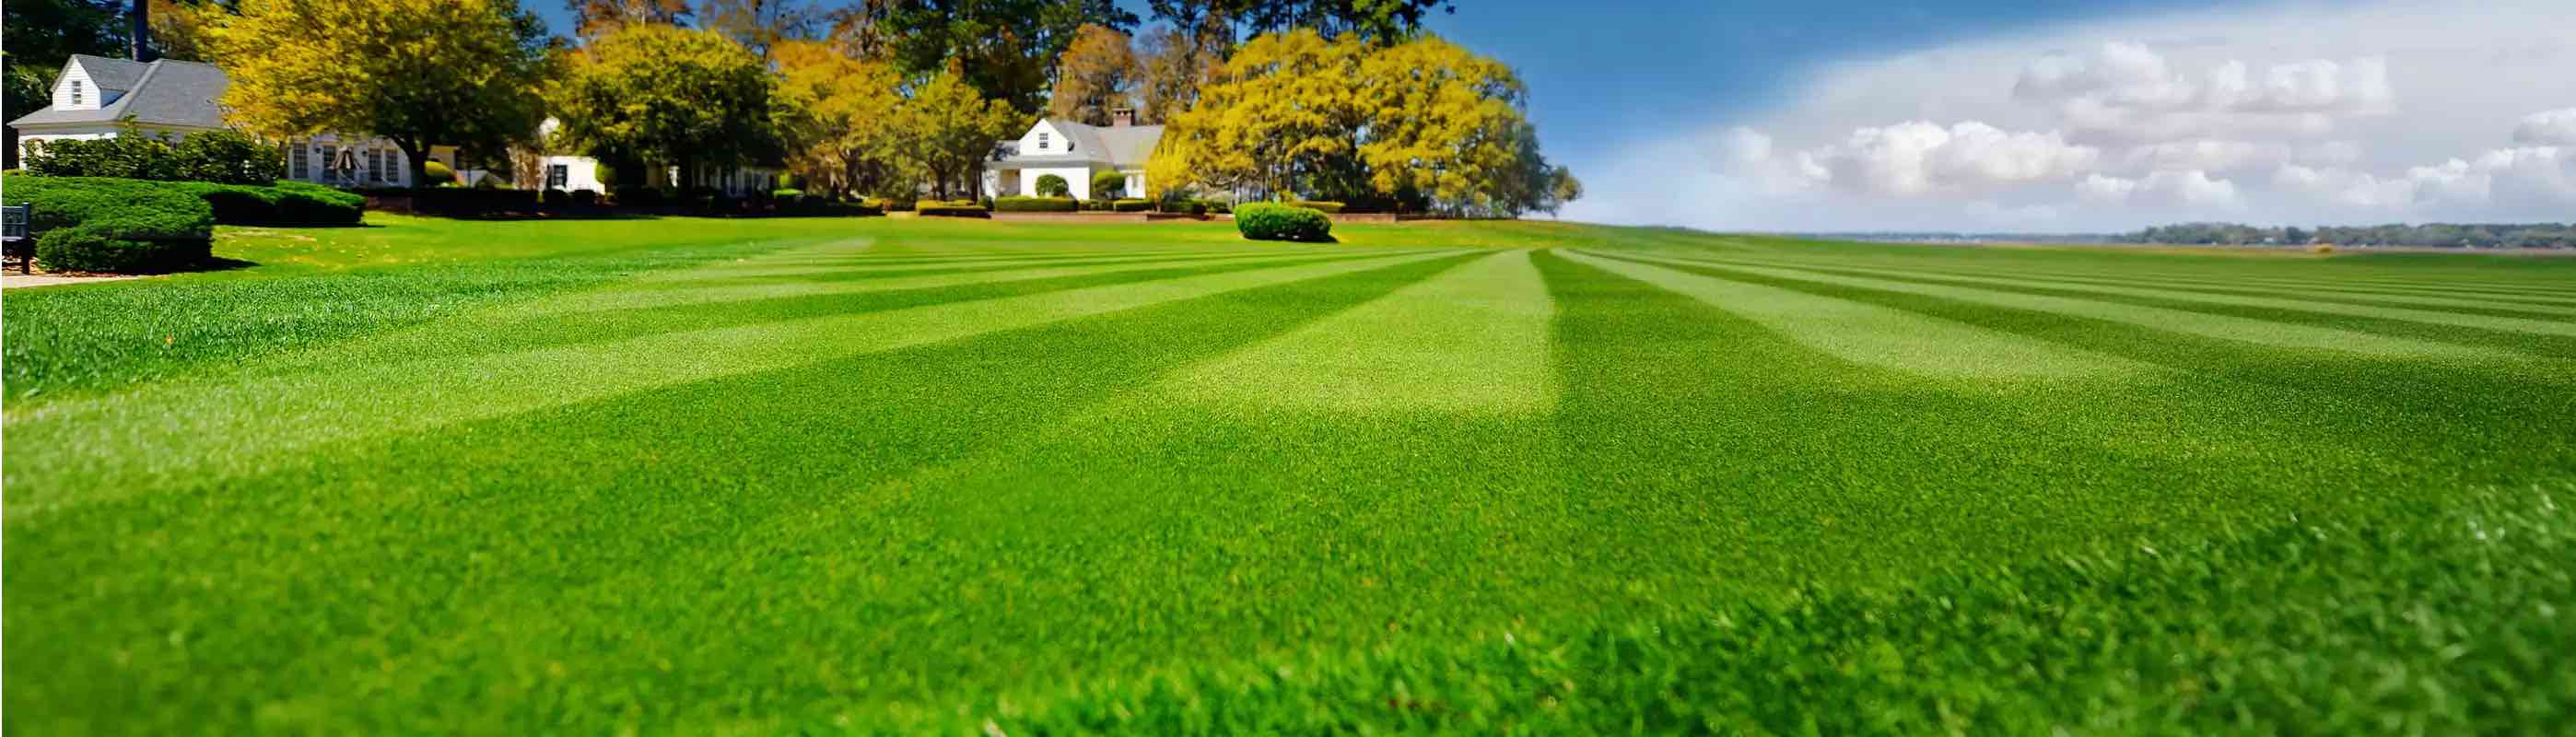 Green Grass yard - About Us at Lawn Synergy